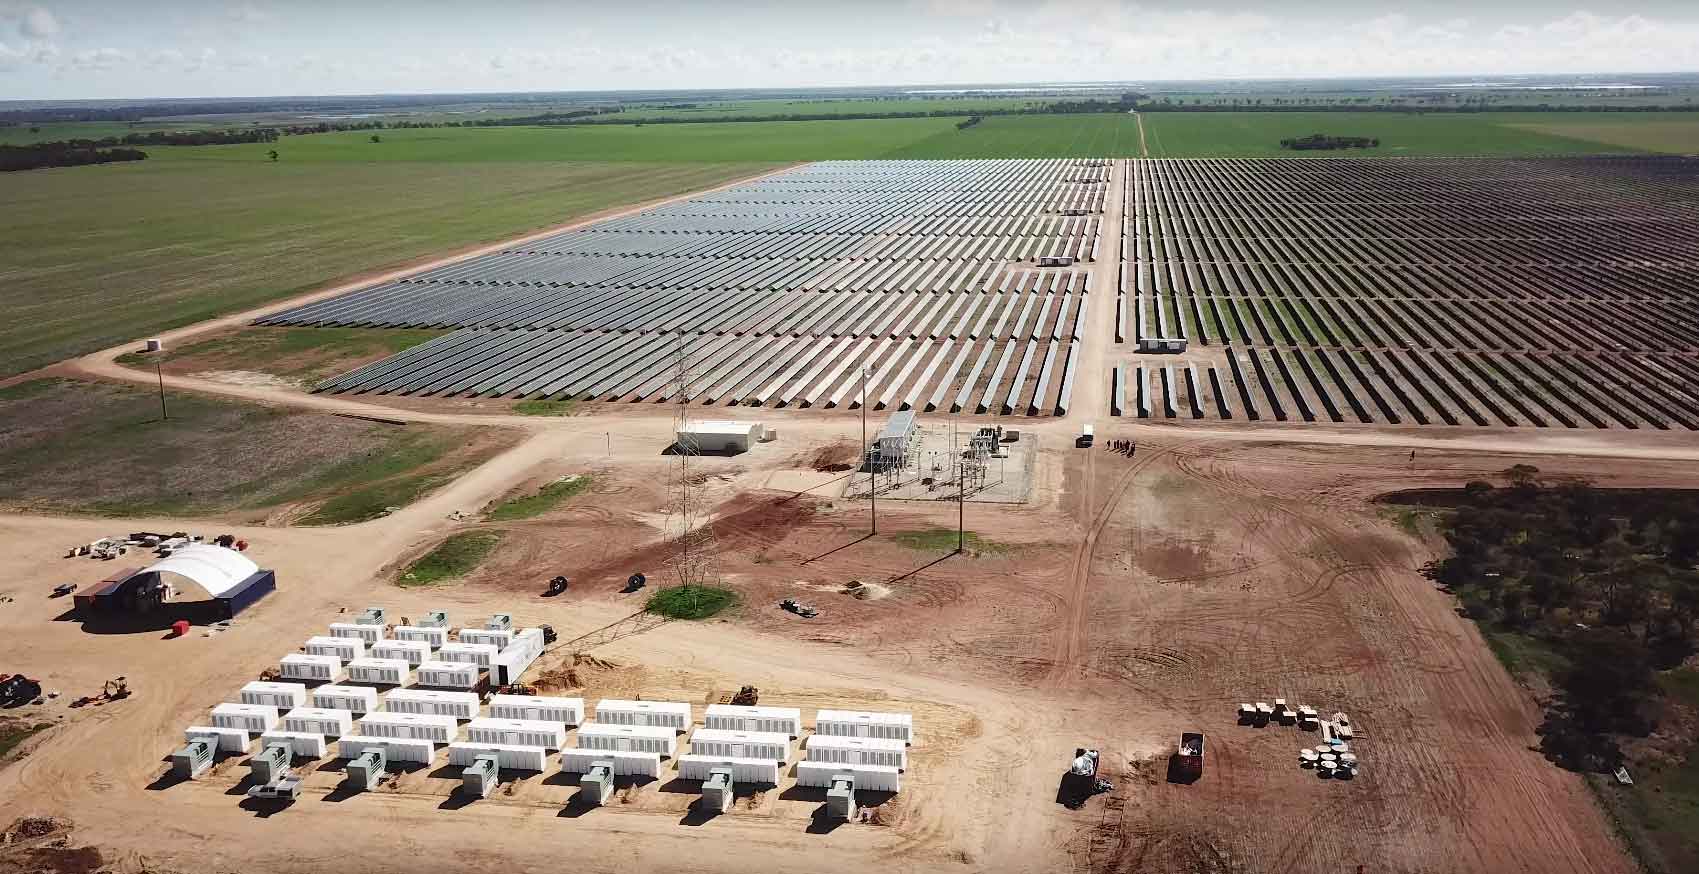 Arial view of a large-scale solar farm